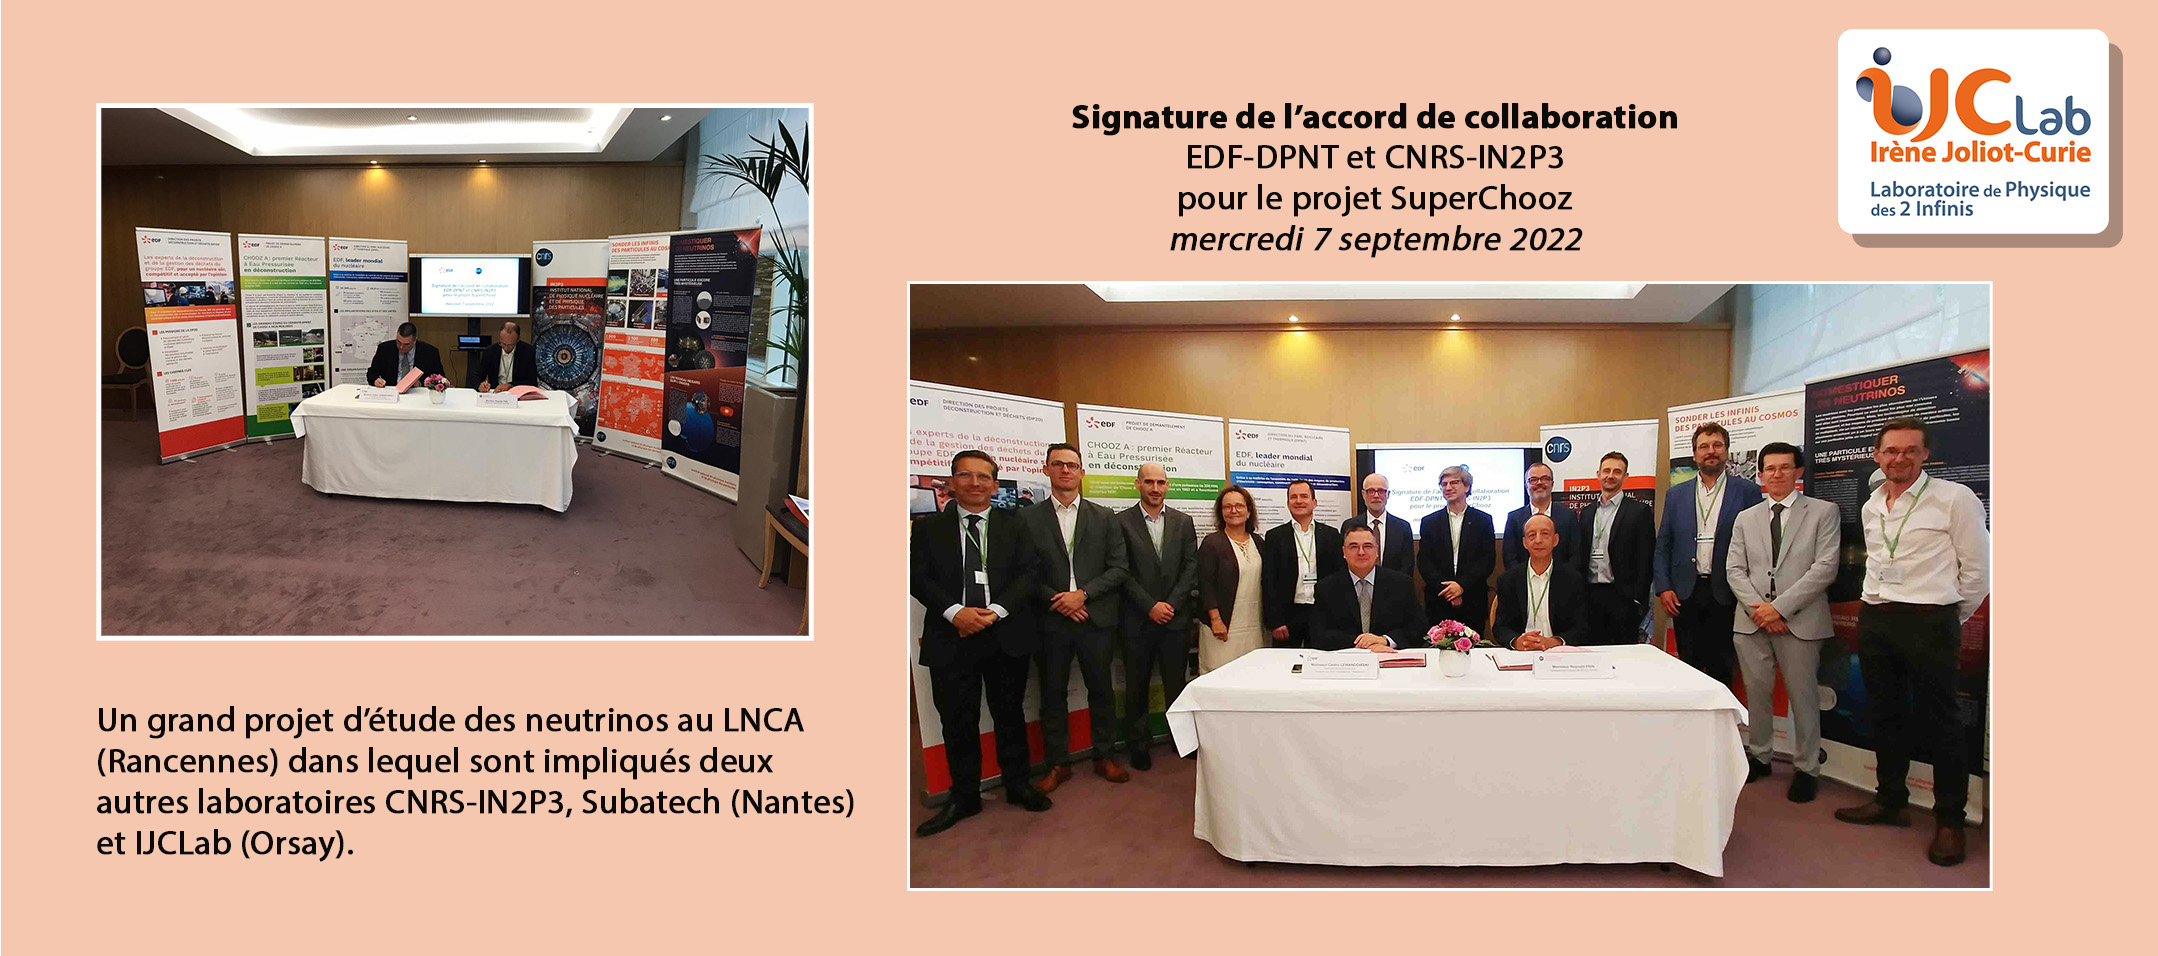 Signature of the EDF and CNRS partnership for the SuperChooz project